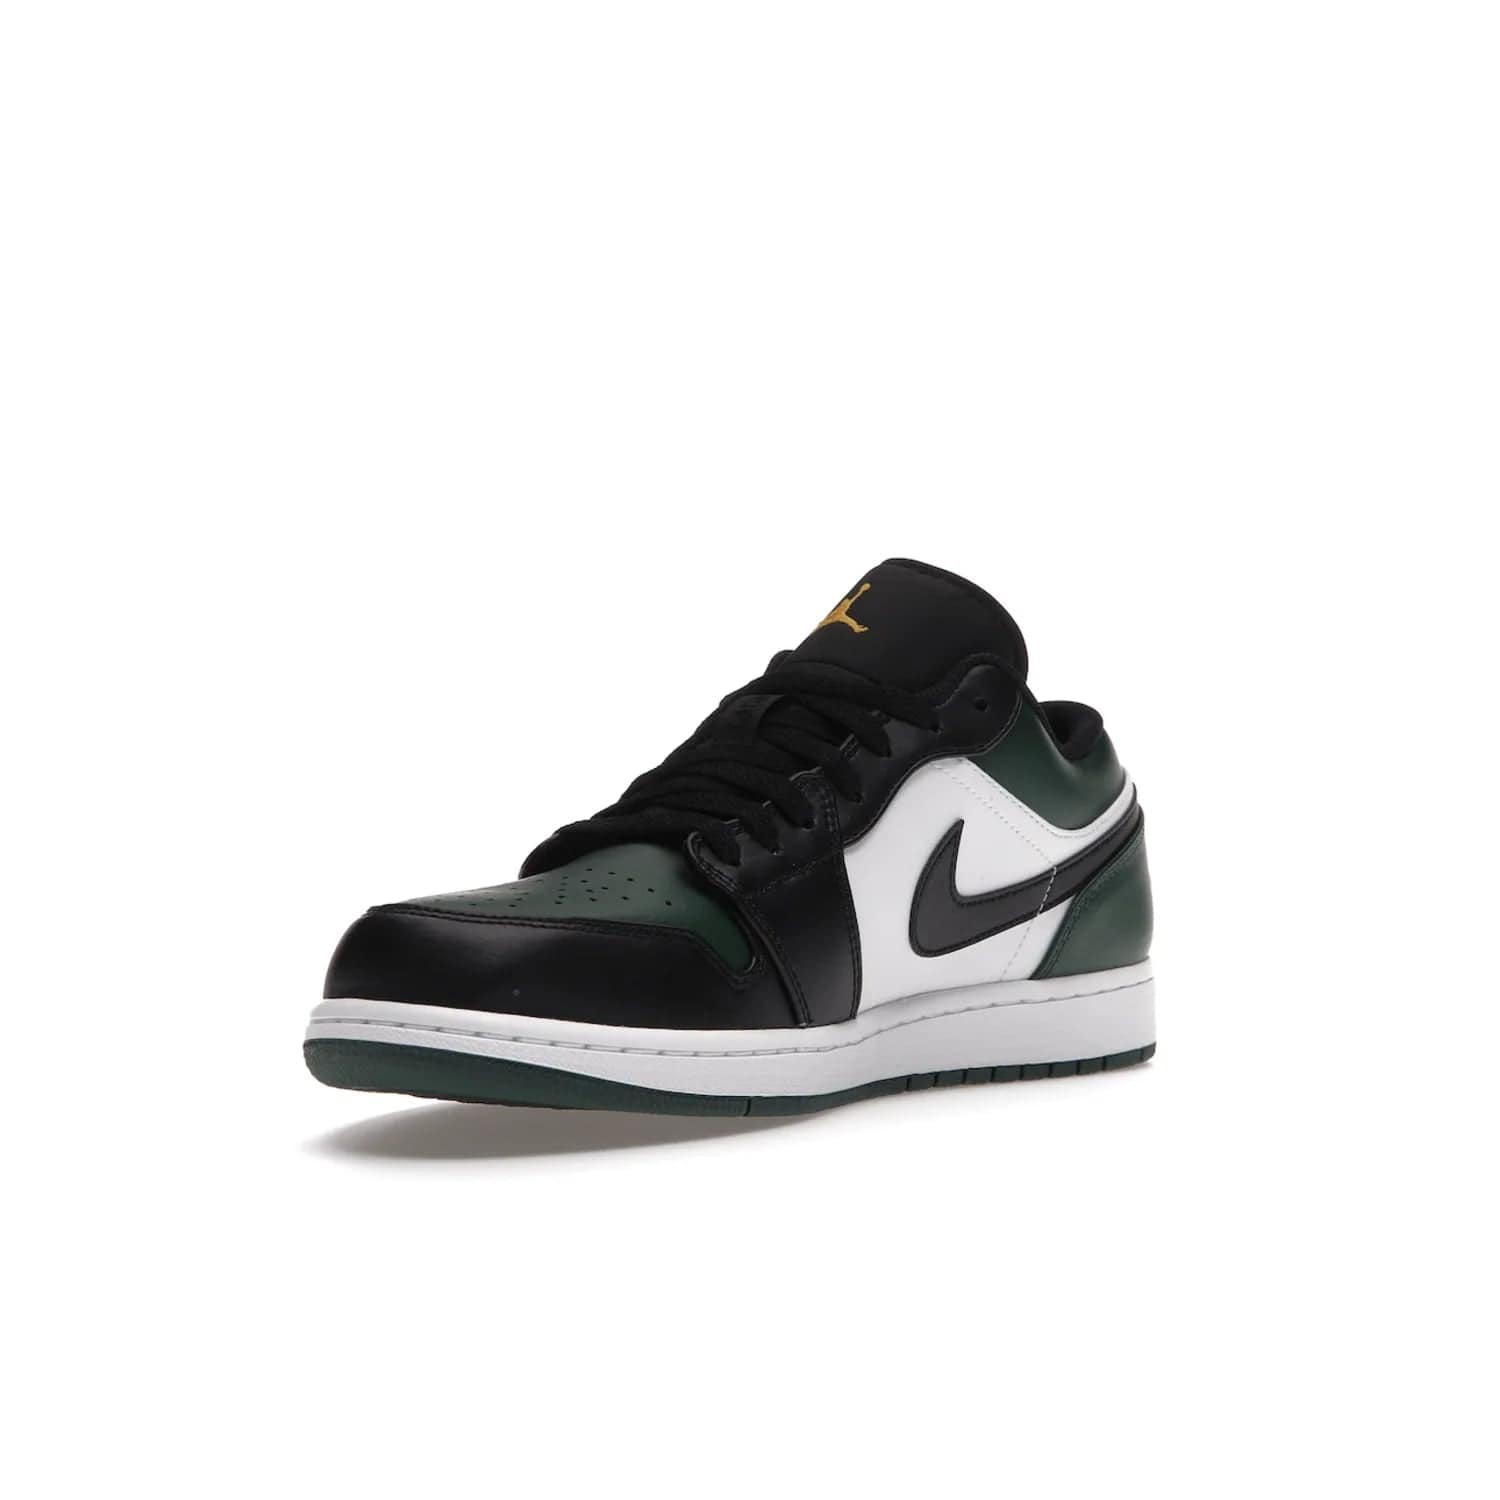 Jordan 1 Low Green Toe - Image 14 - Only at www.BallersClubKickz.com - The Jordan 1 Low Green Toe features white, black and Noble Green leather with black Swoosh. Get the classic Bred Toe-inspired color blocking with green perforated toe box. White and green Air sole completes the design. Released in October 2021 at only $100. Grab your pair now!